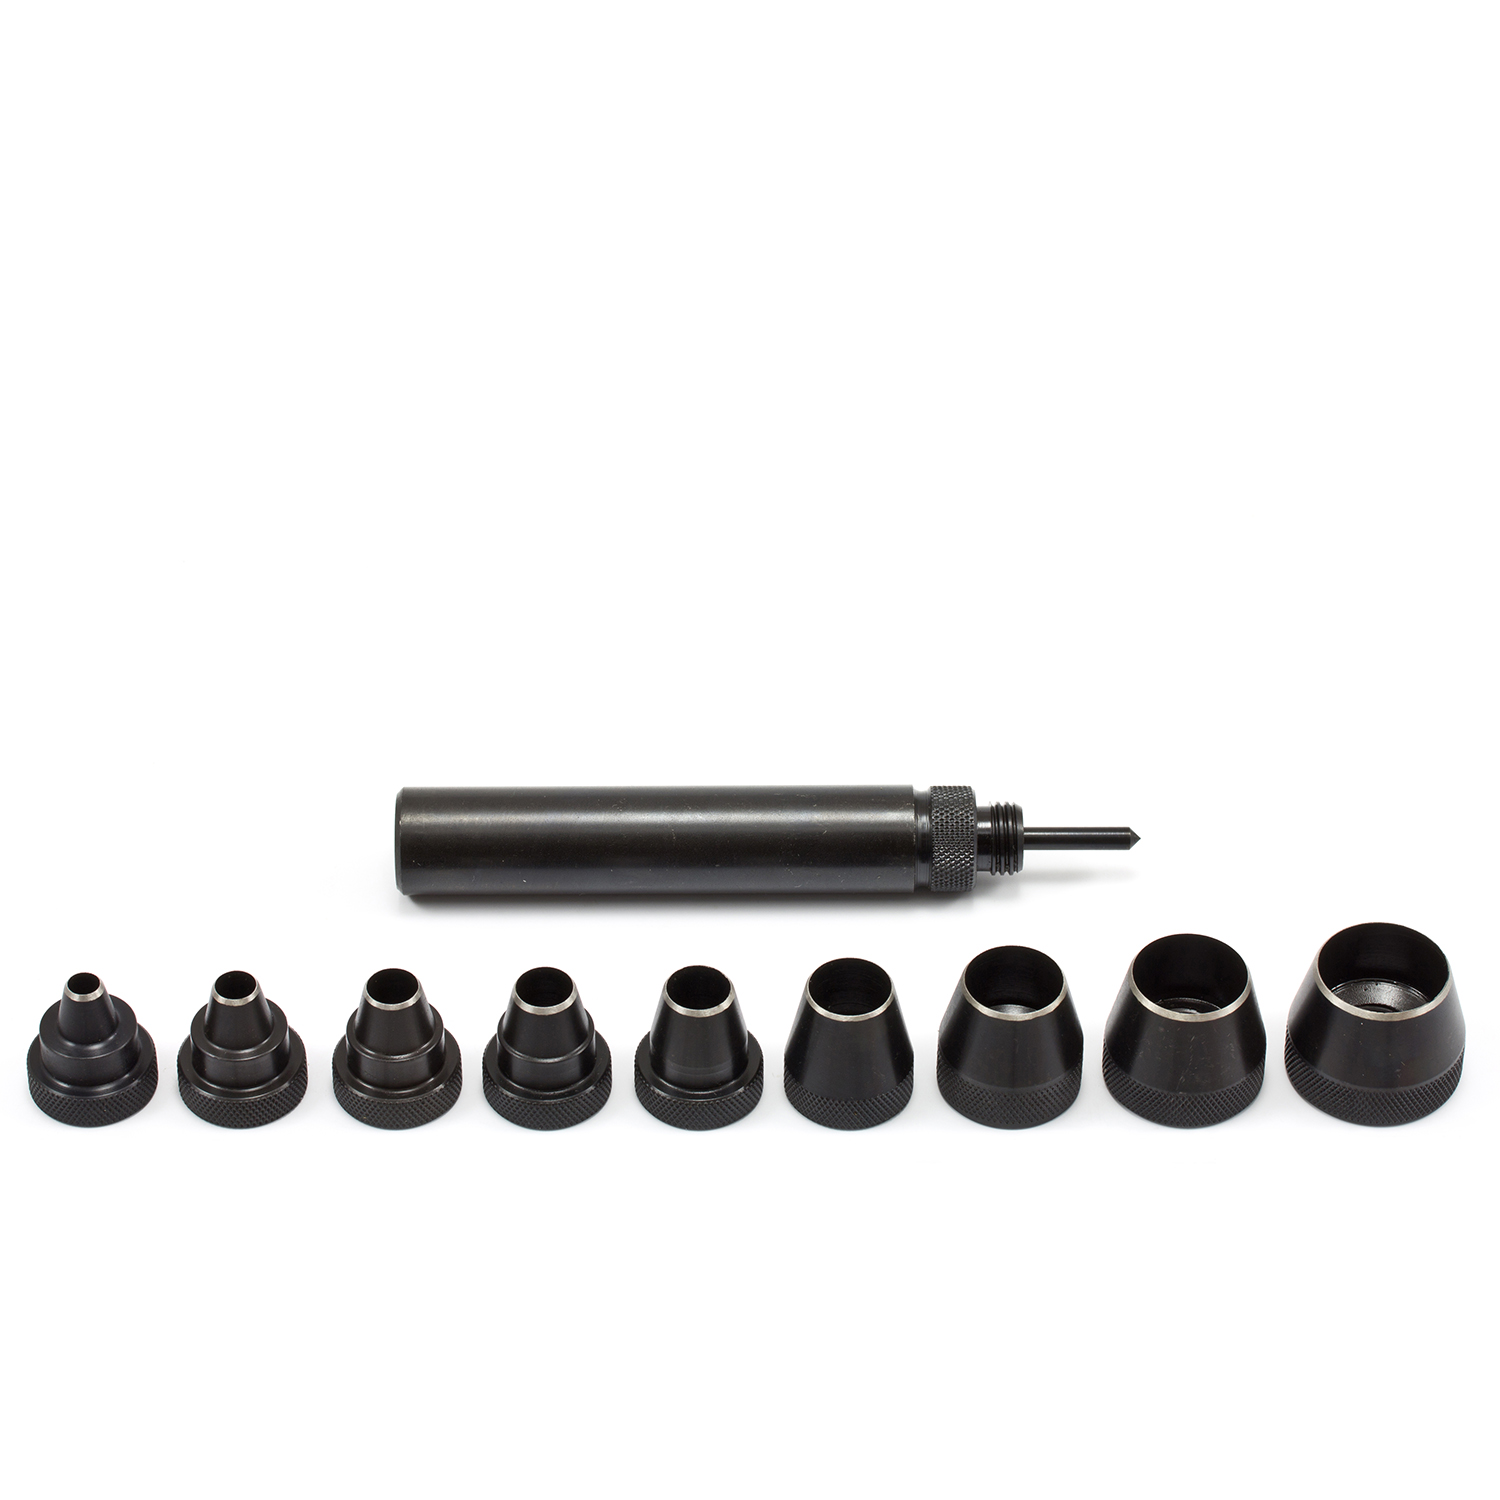 Self-Centering Punch Set With 9 Hole Cutting Dies #K156 | Trivantage